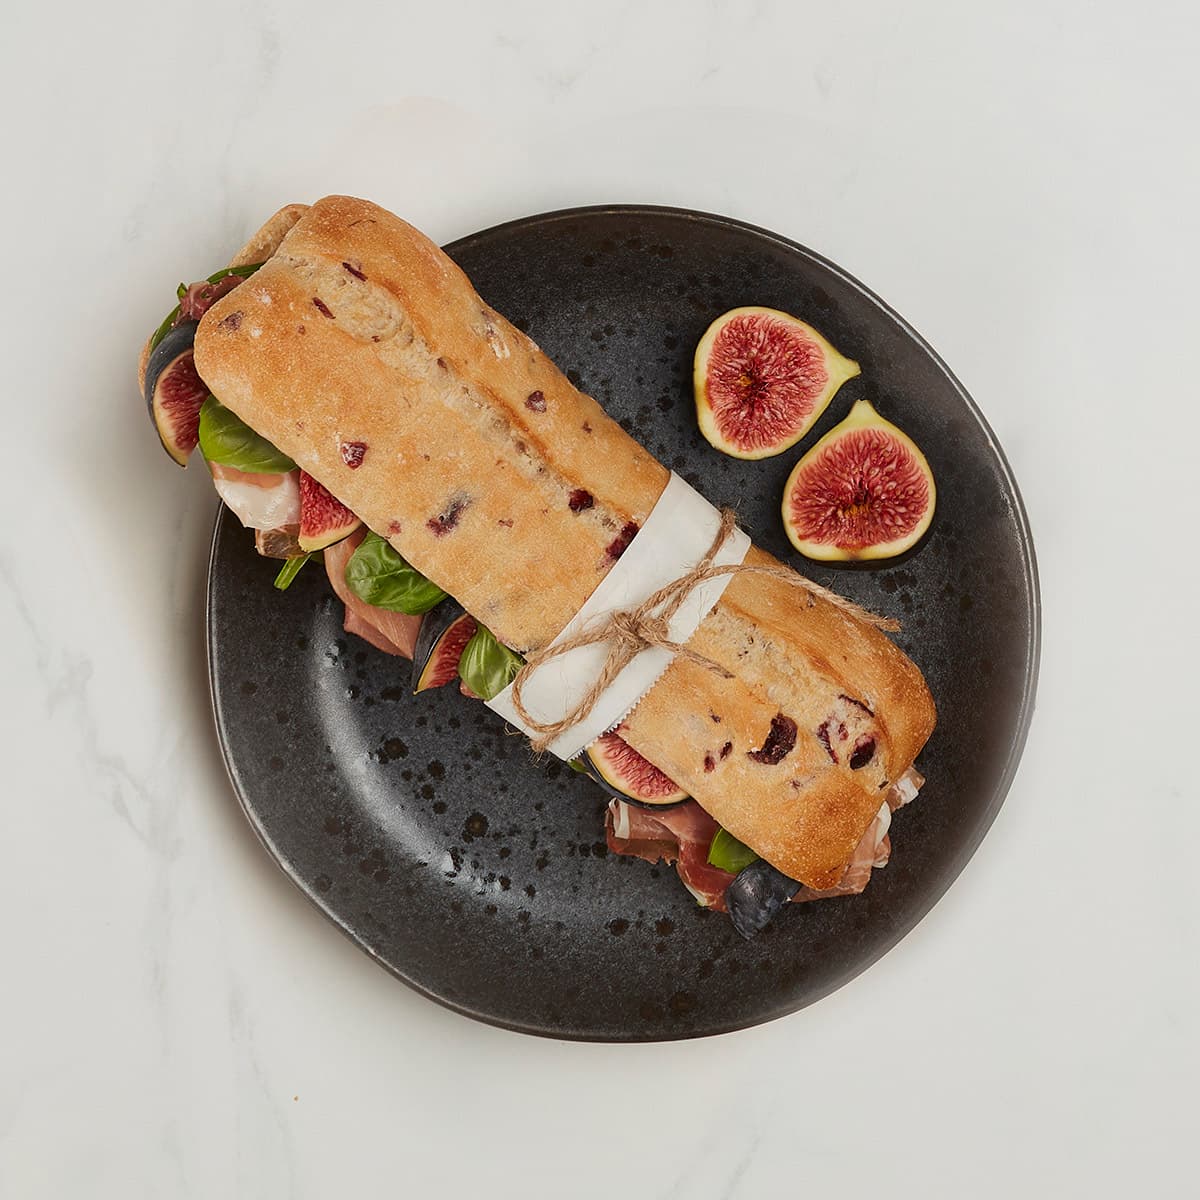 sliced cranberry baguettine sandwich with two figs